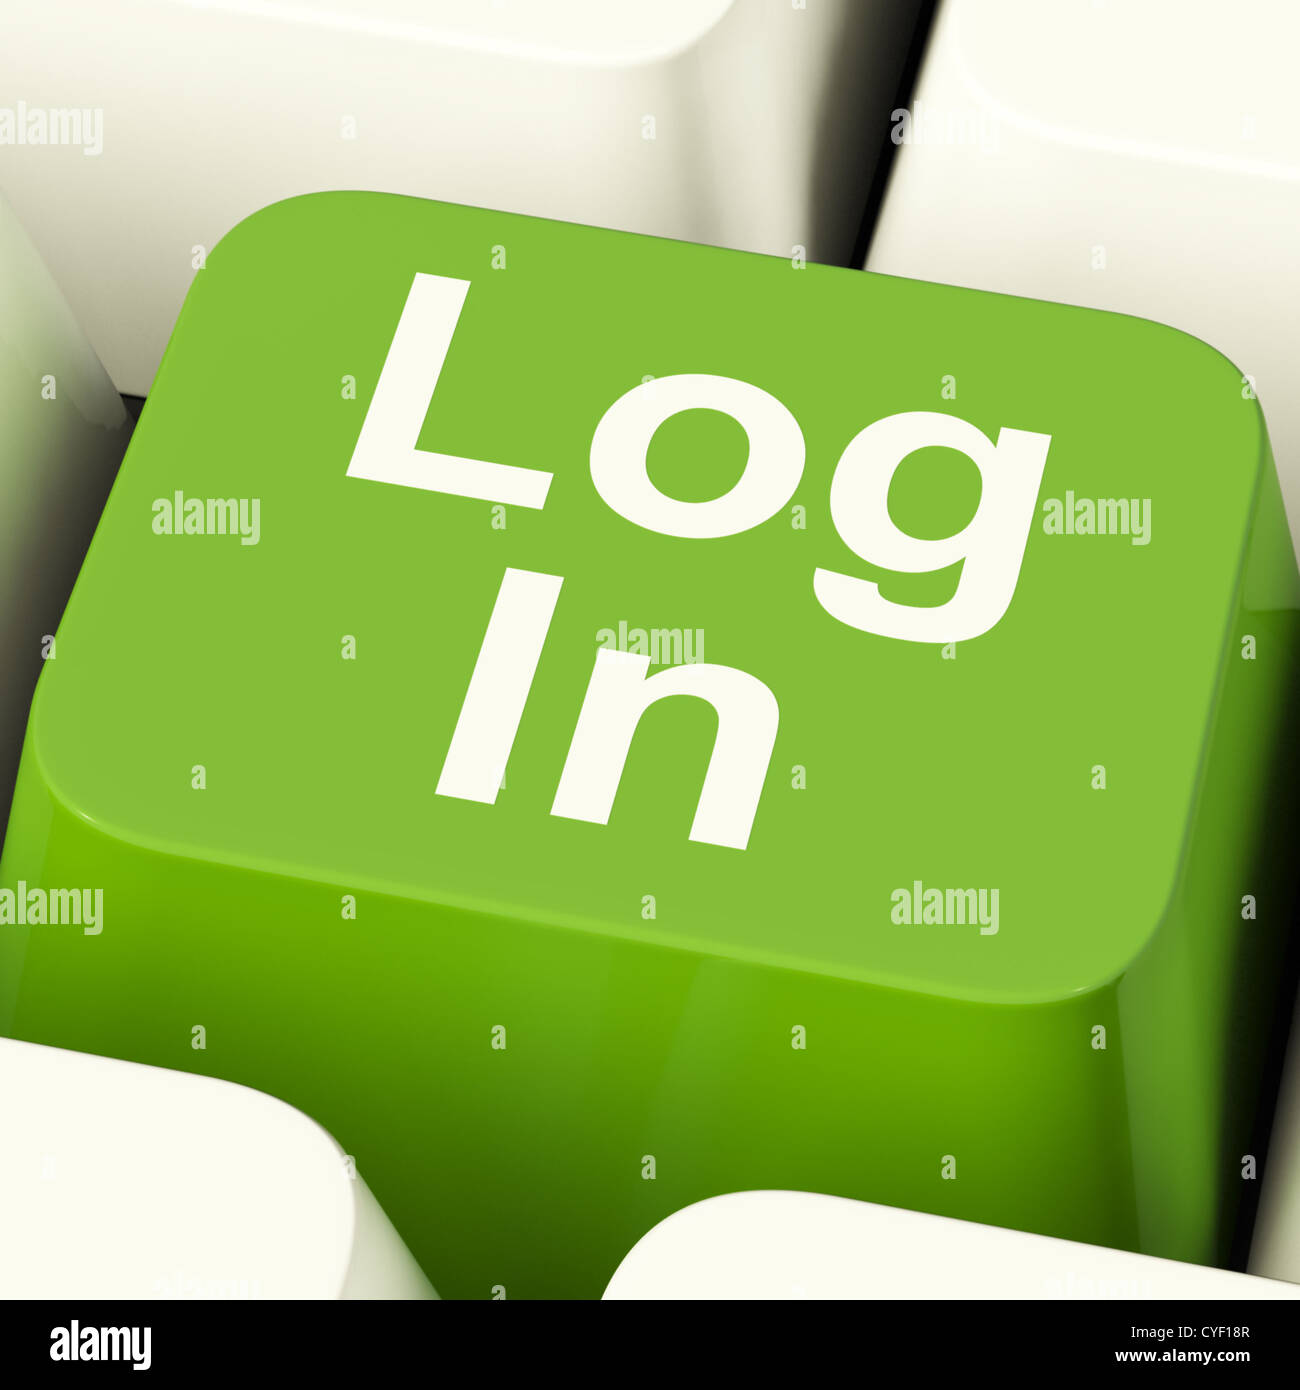 Log In Computer Key Green Showing Access And Entering Websites Stock Photo